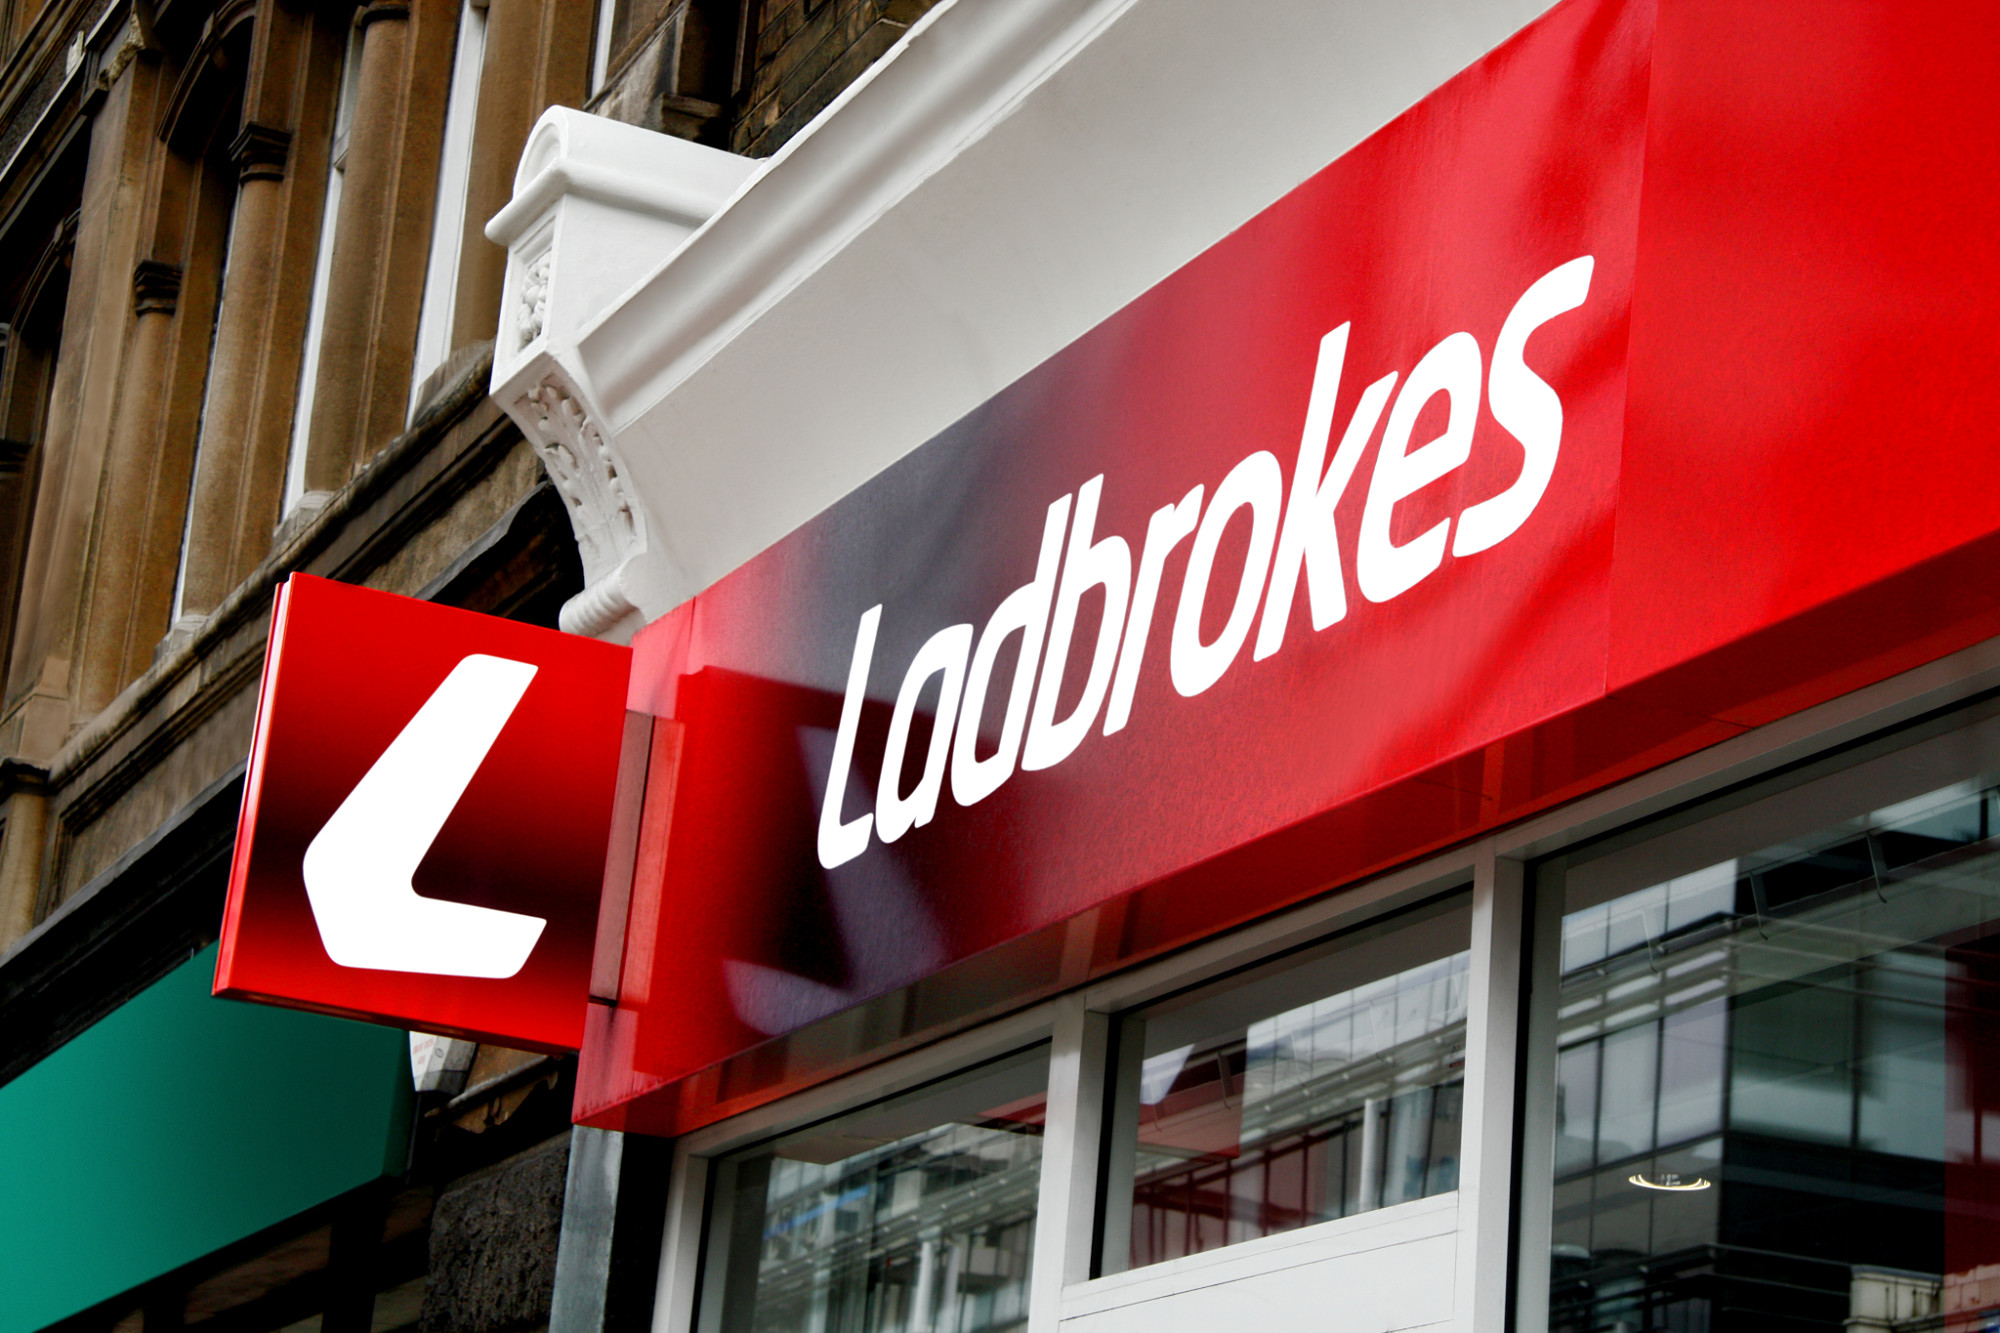 Ladbrokes owner Entain rejects £8.1bn proposal from MGM ...